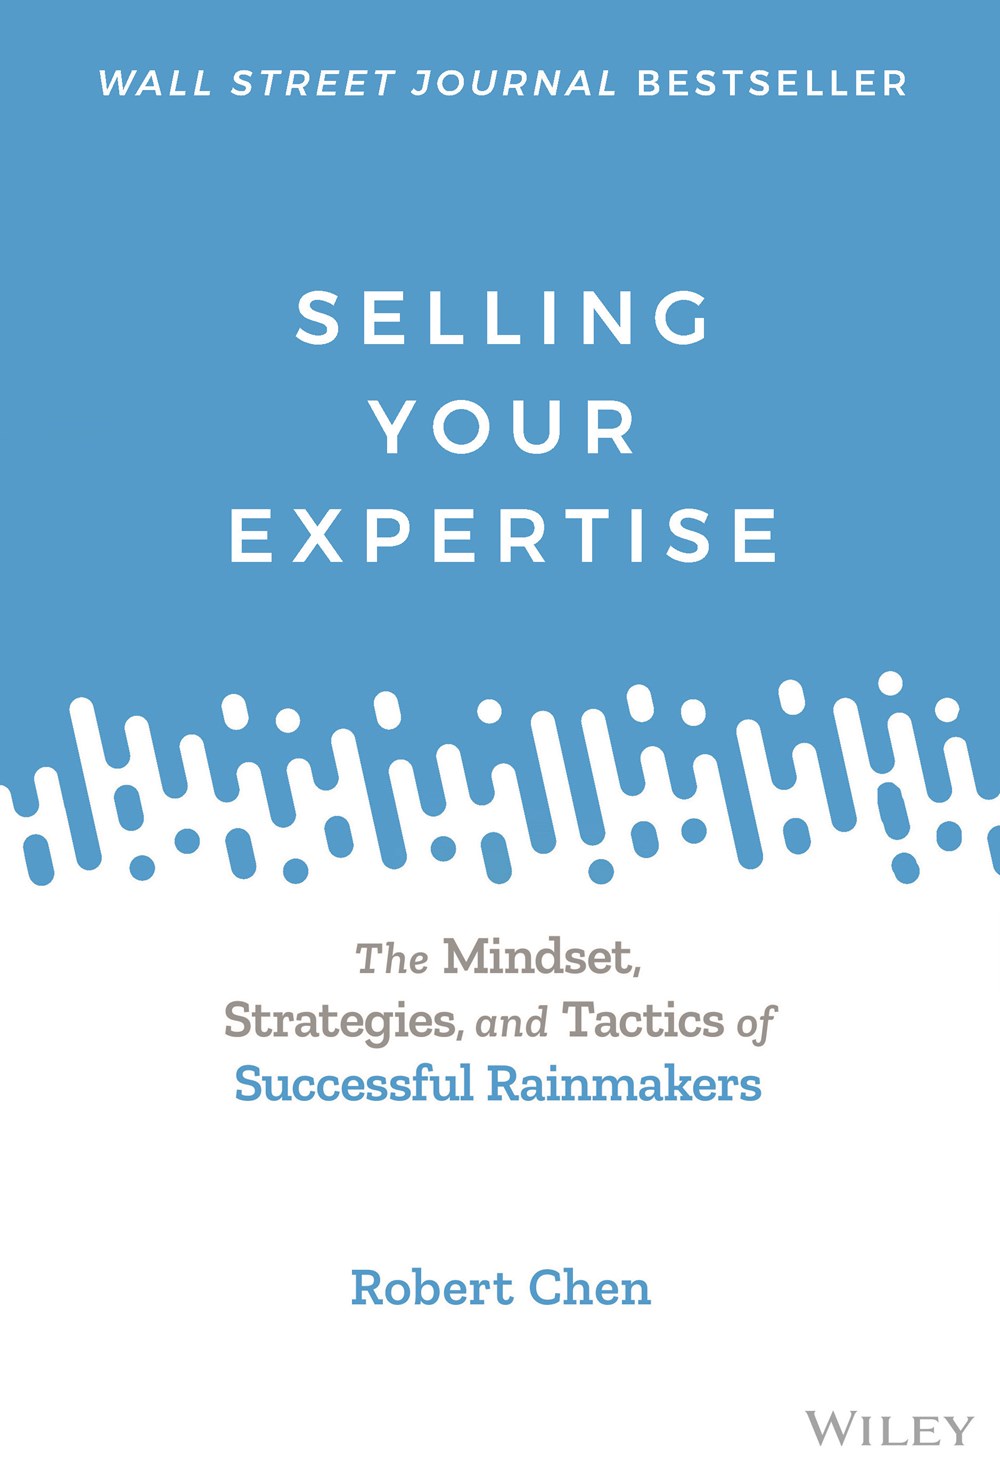 Selling Your Expertise The Mindset, Strategies, and Tactics of Successful Rainmakers